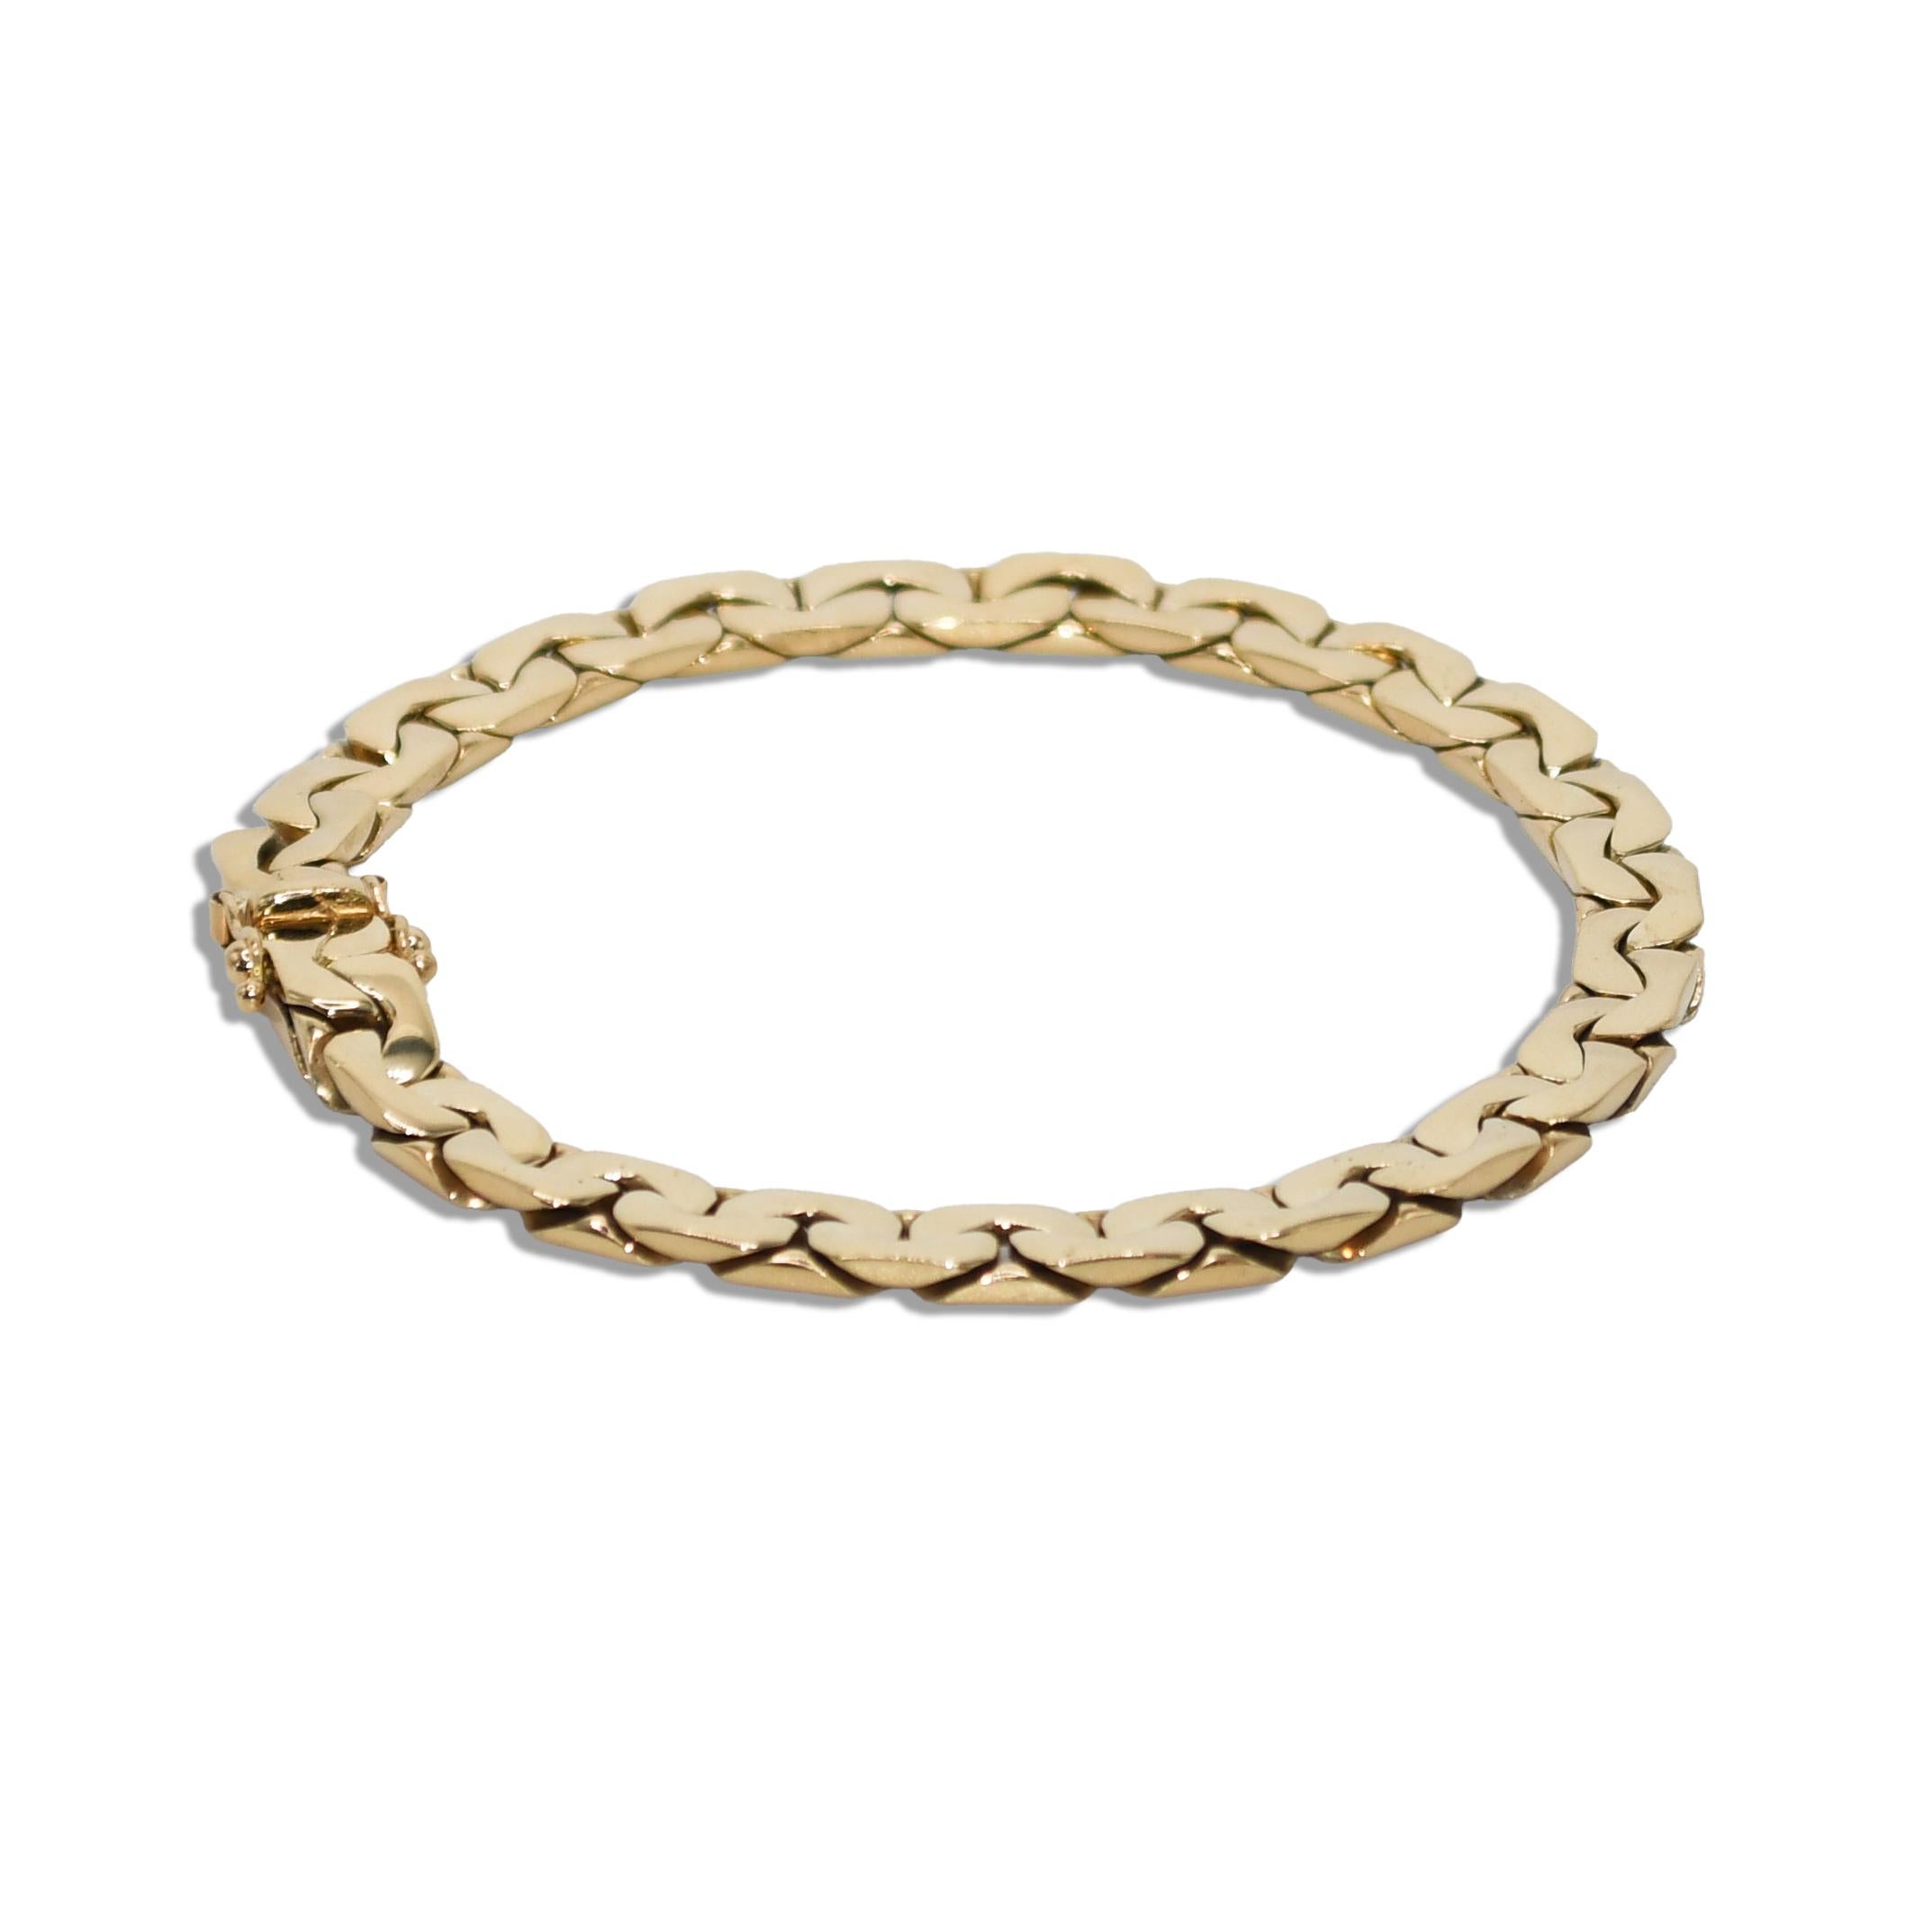 Men's 14k yellow gold curb link bracelet.
Stamped 18k and weighs 33 grams.
The bracelet measures 8 1/4 inches long and 6.5mm wide.
Excellent condition.